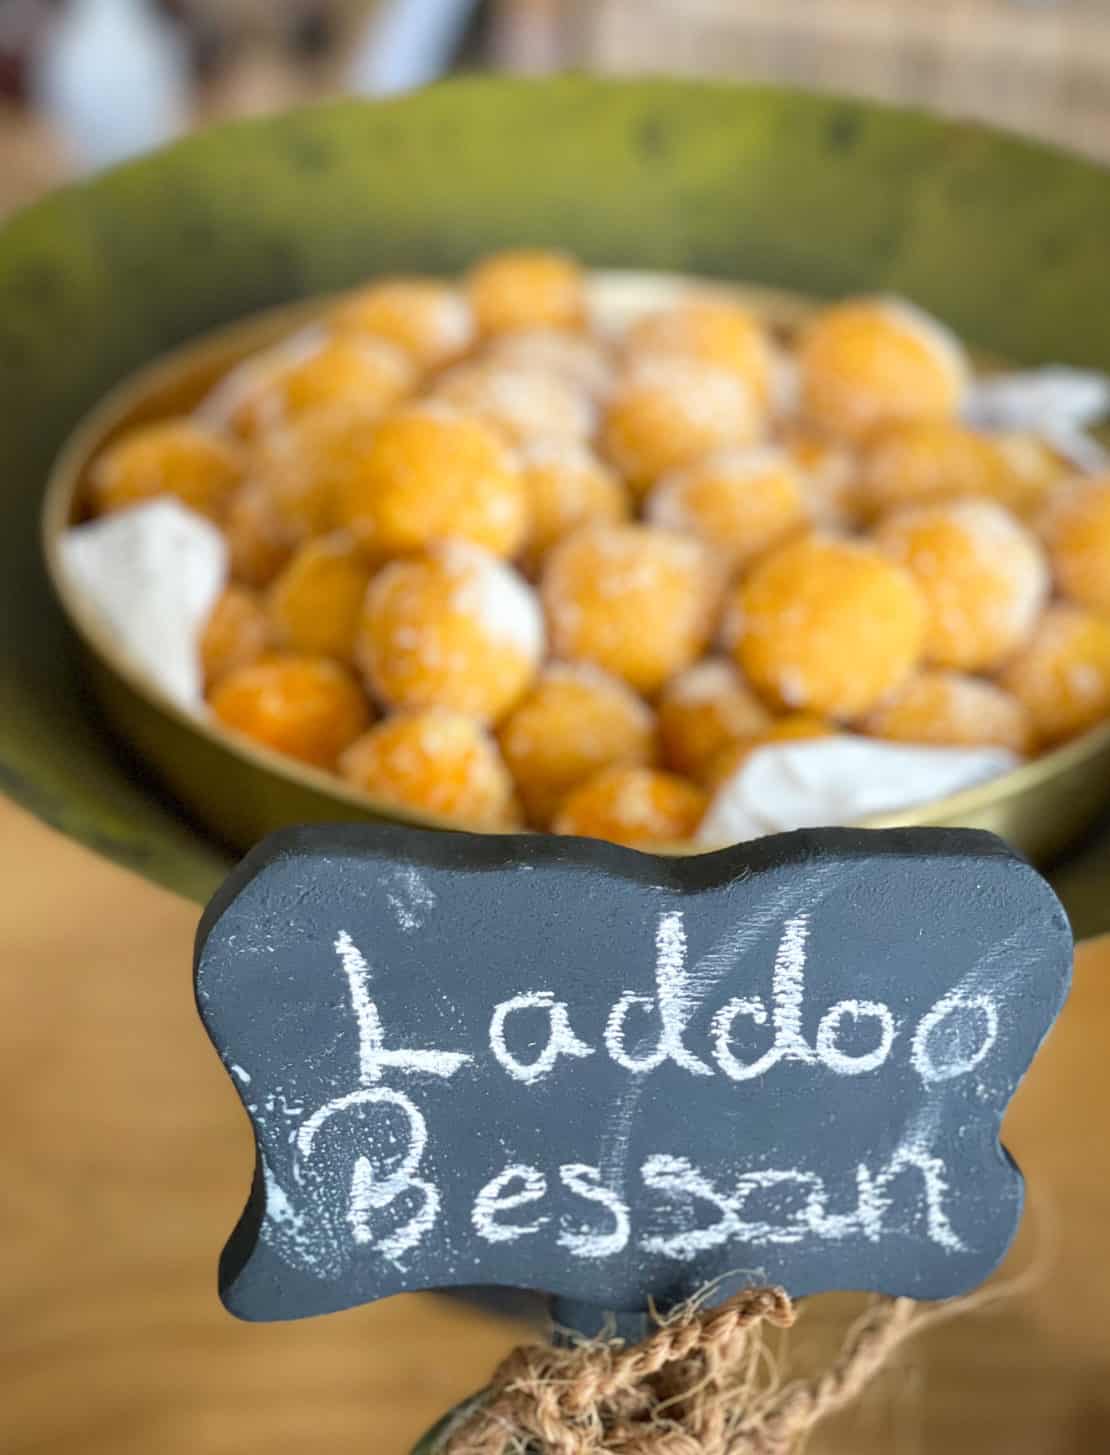 
Traditional Mauritian cuisine includes snacks like Laddoo Bessan found at La Pirogue